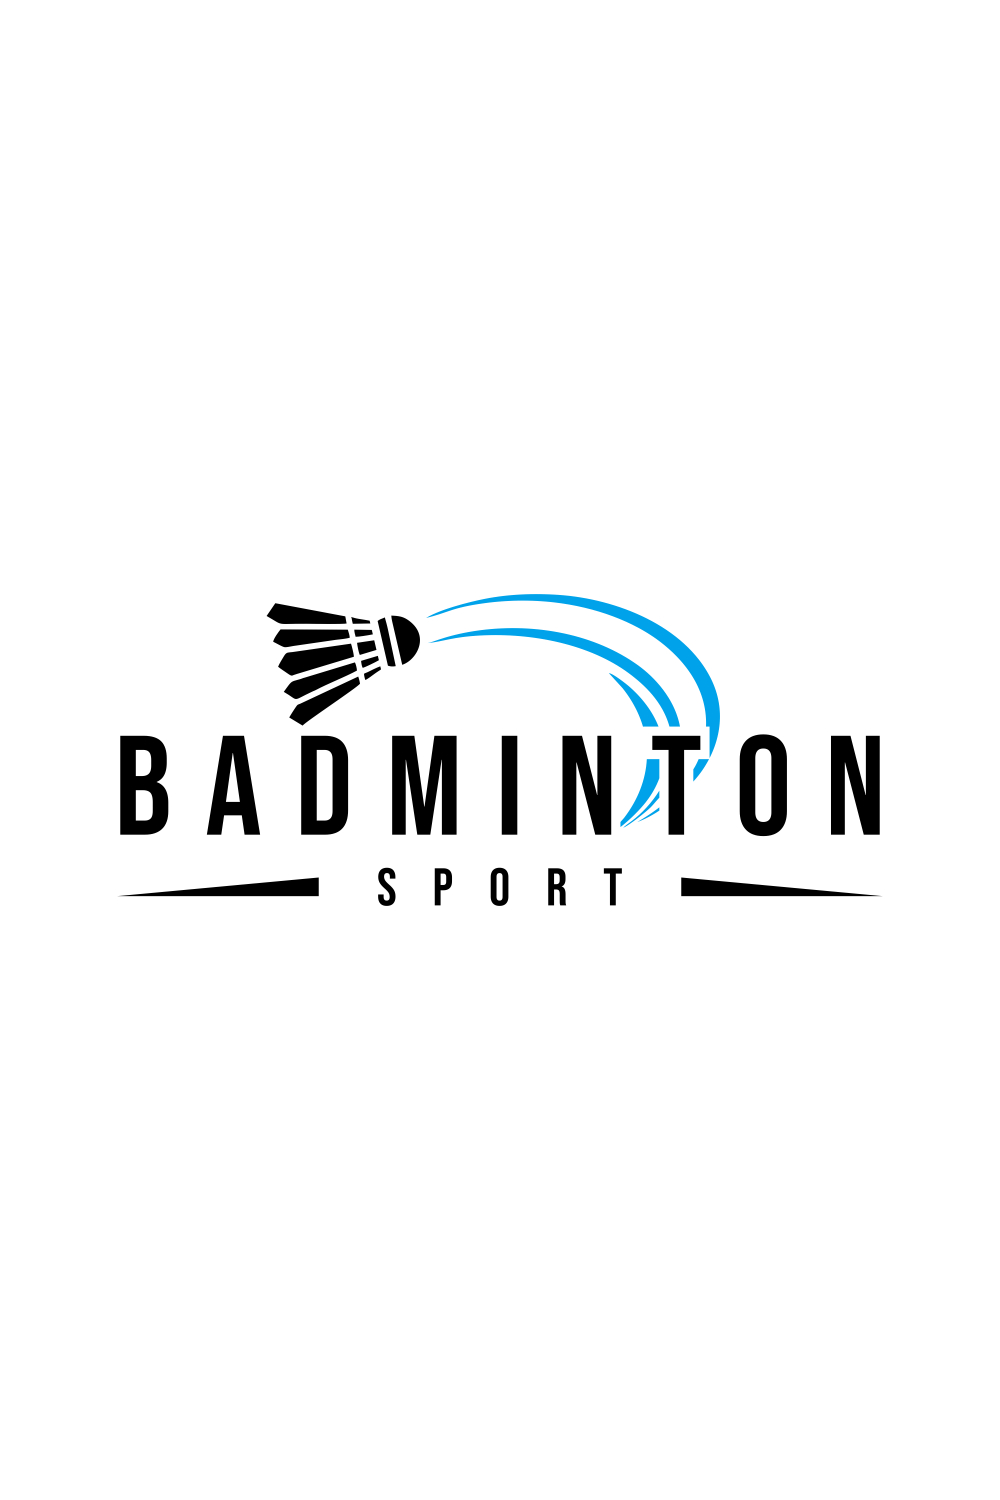 Badminton logo design for Sports logo and Badminton Championship club template pinterest preview image.